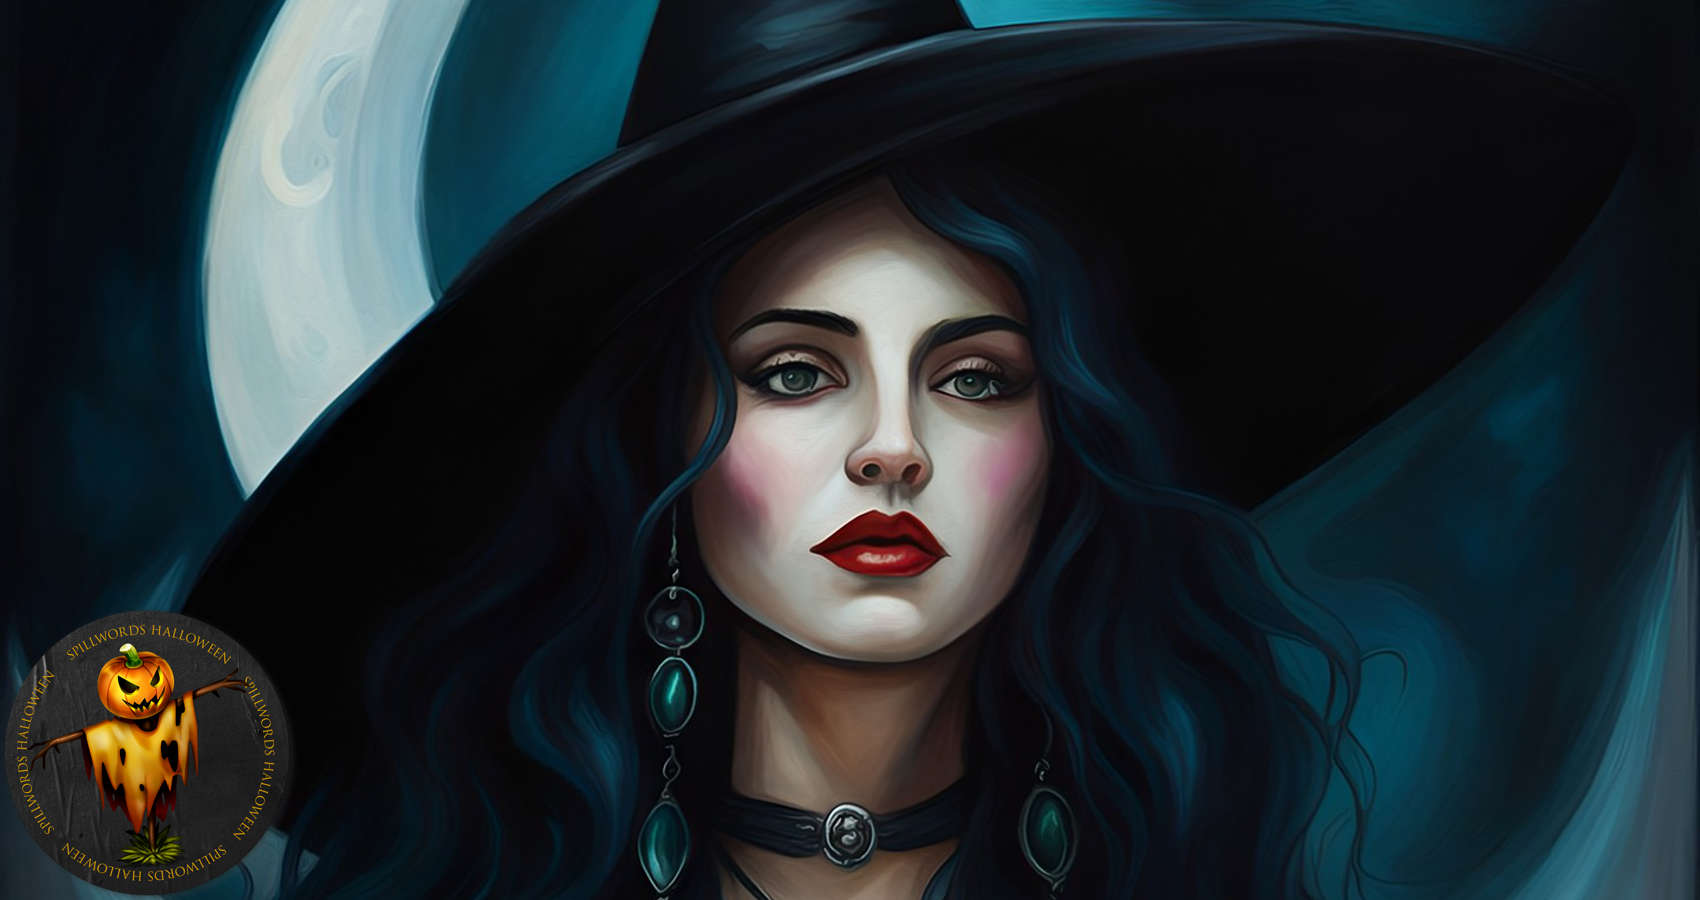 The Bad Witch's Familiar, story by Beth Mills at Spillwords.com